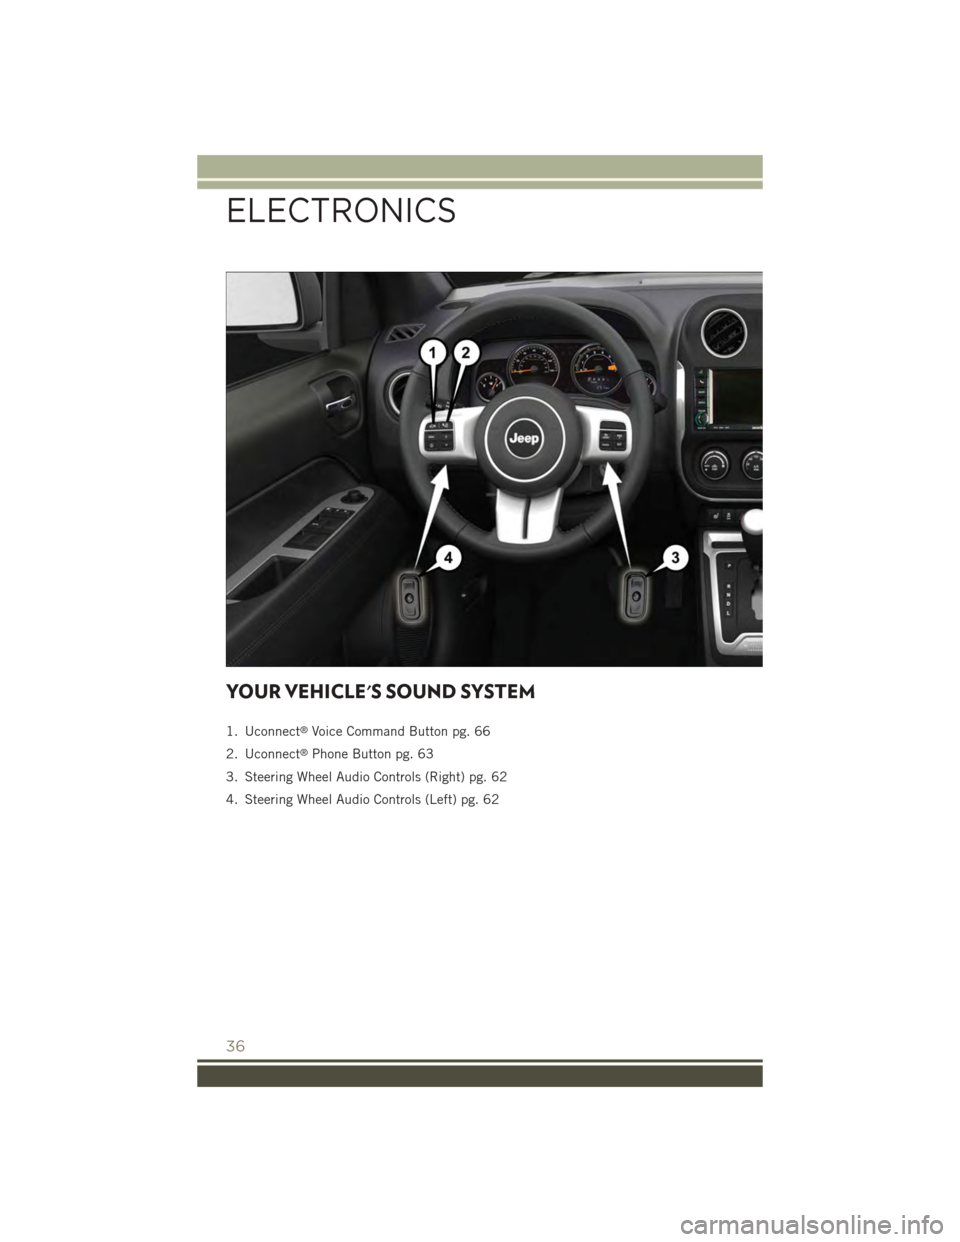 JEEP PATRIOT 2015 1.G Owners Guide YOUR VEHICLES SOUND SYSTEM
1. Uconnect®Voice Command Button pg. 66
2. Uconnect®Phone Button pg. 63
3. Steering Wheel Audio Controls (Right) pg. 62
4. Steering Wheel Audio Controls (Left) pg. 62
ELE